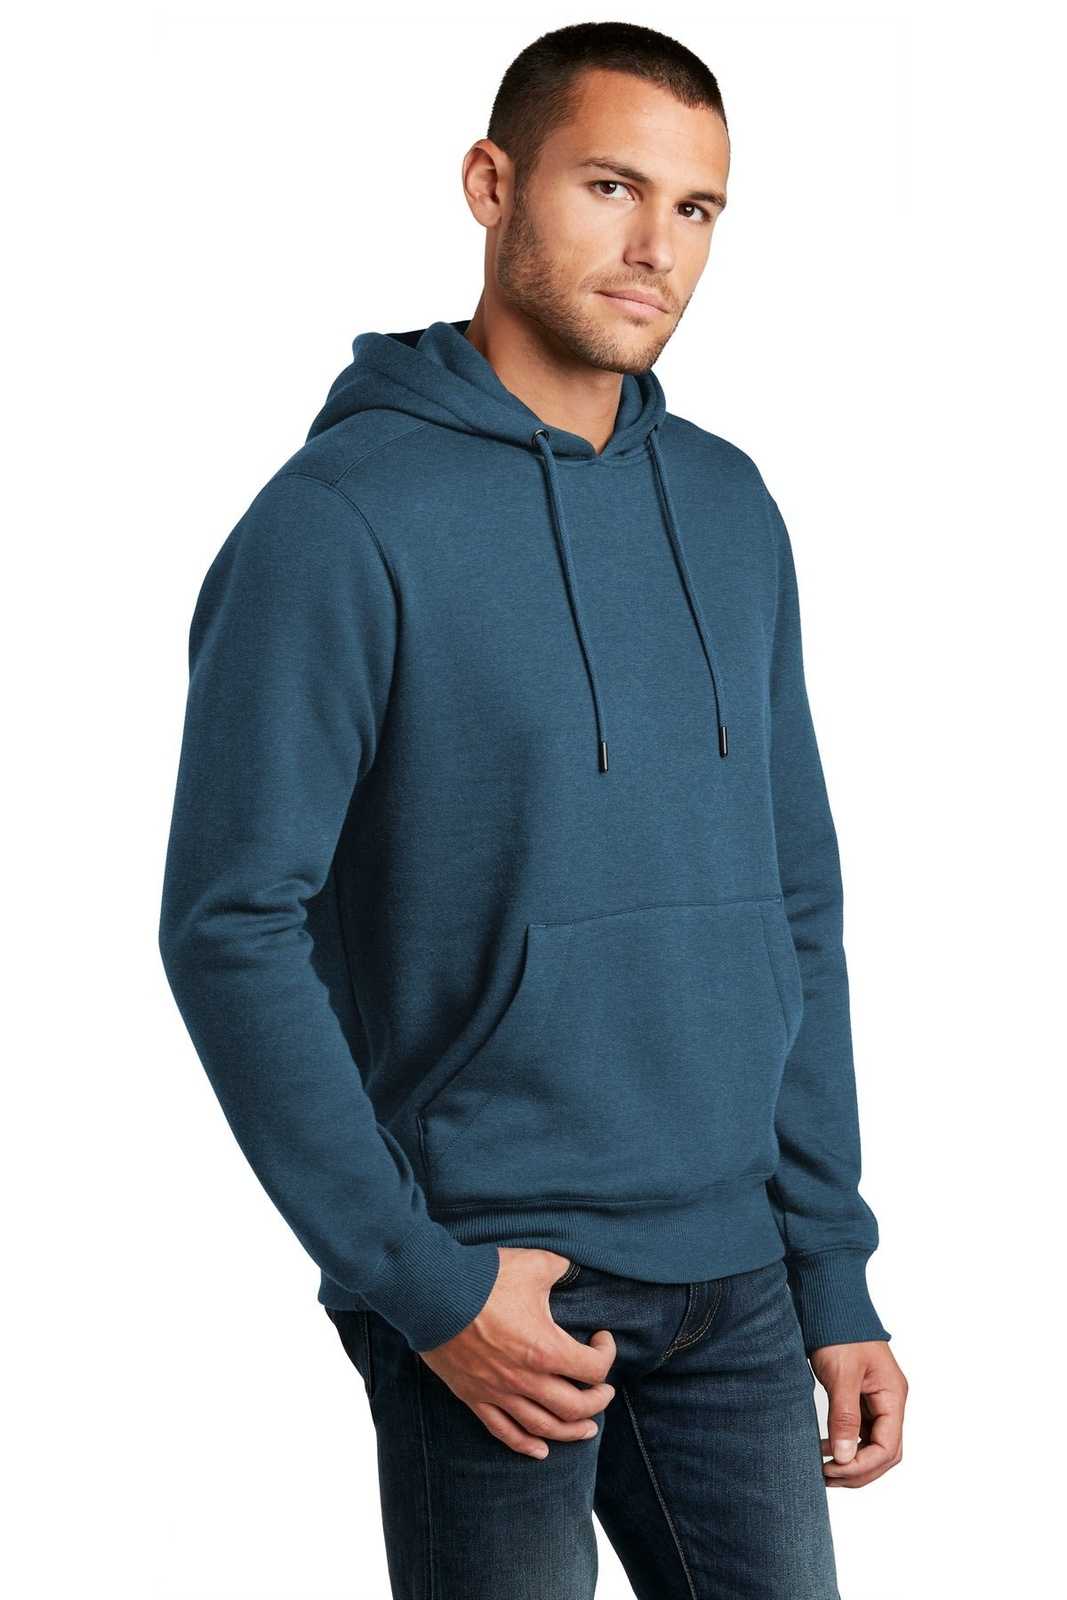 District DT1101 Perfect Weight Fleece Hoodie - Heathered Poseidon Blue - HIT a Double - 4